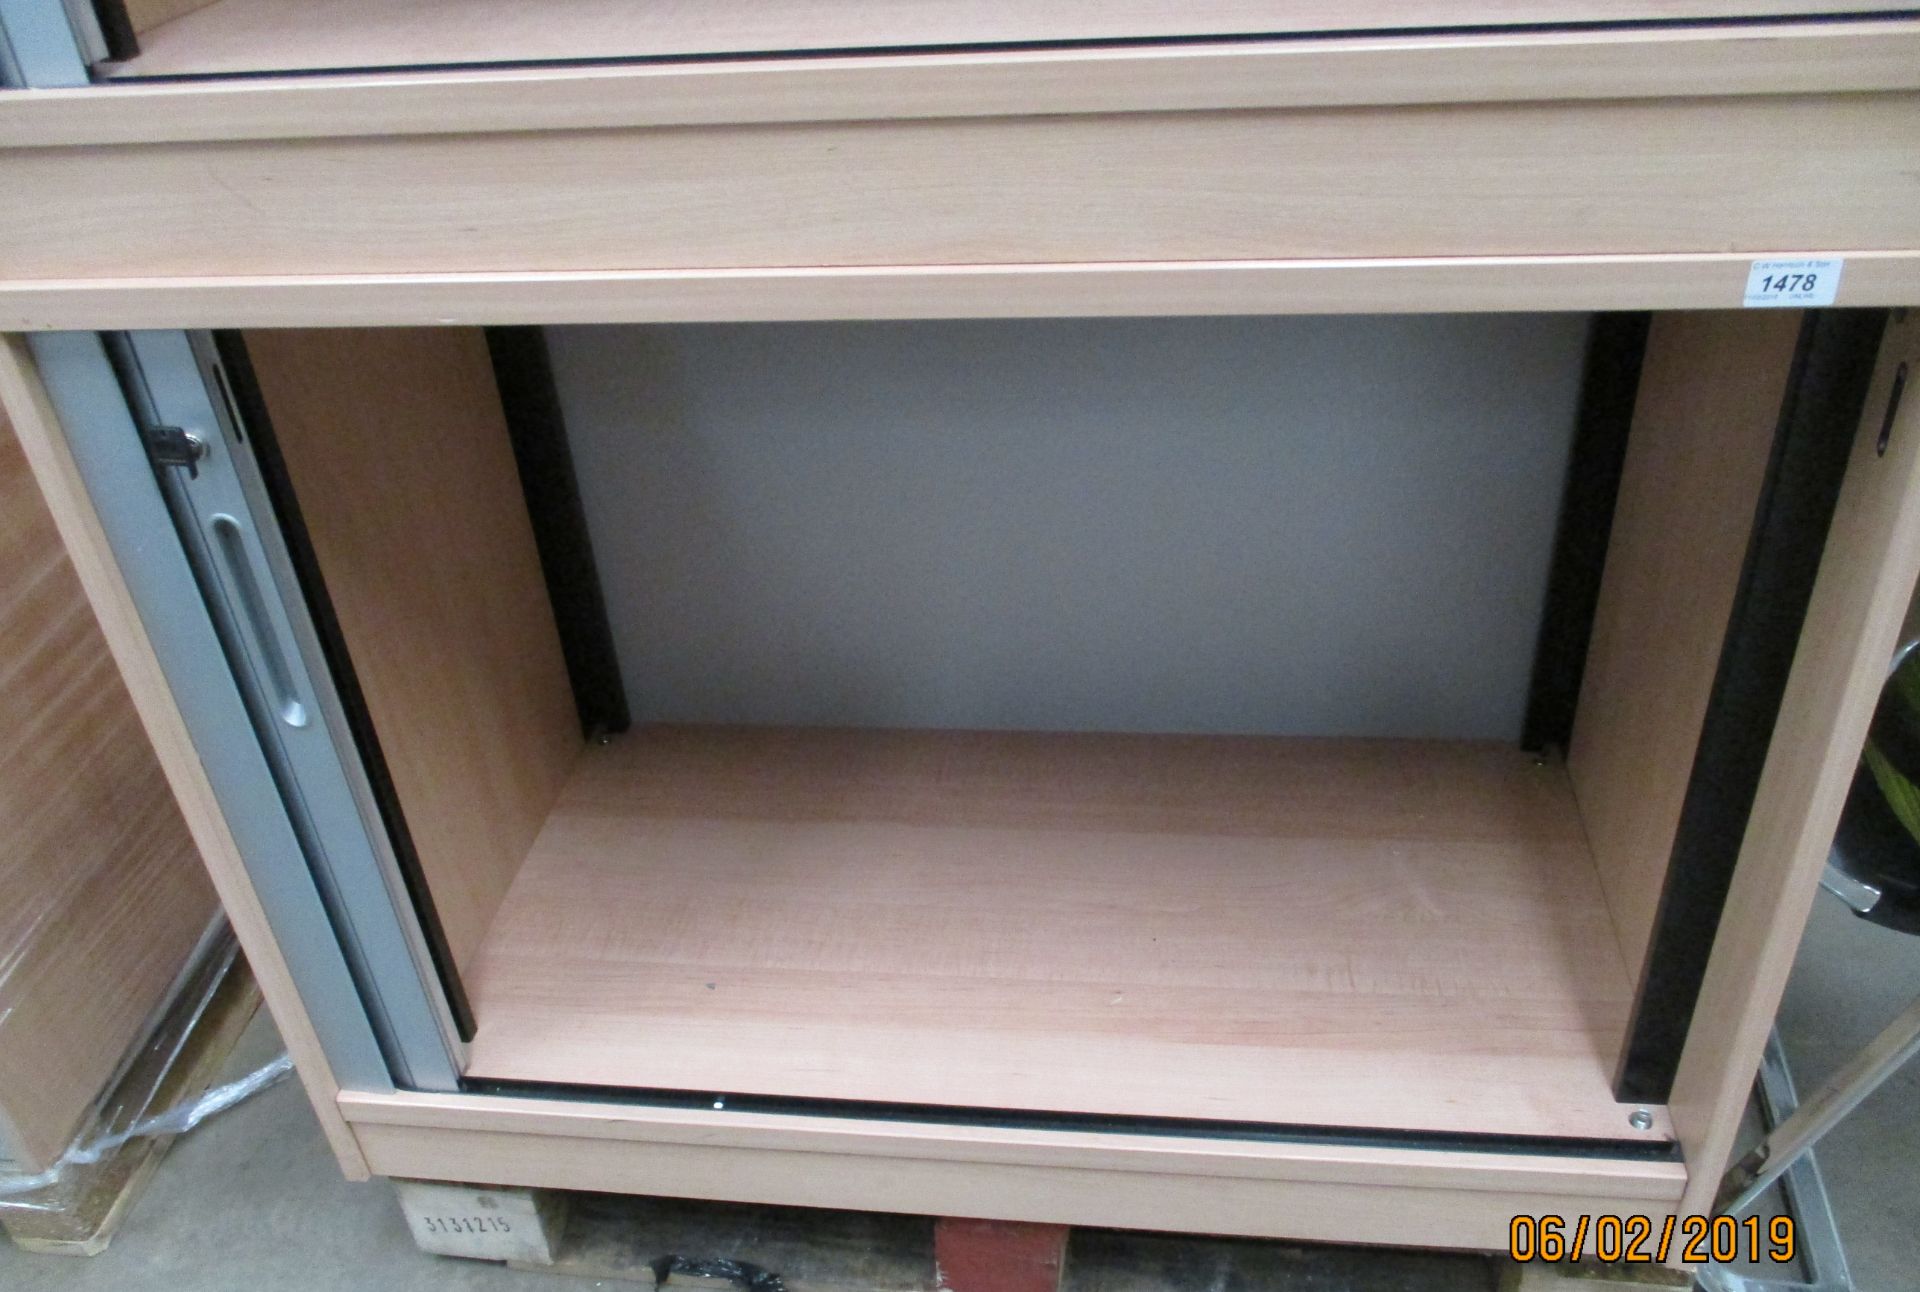 A pine finish tambour front stationery cabinet 100 x 65cm complete with key - no shelves